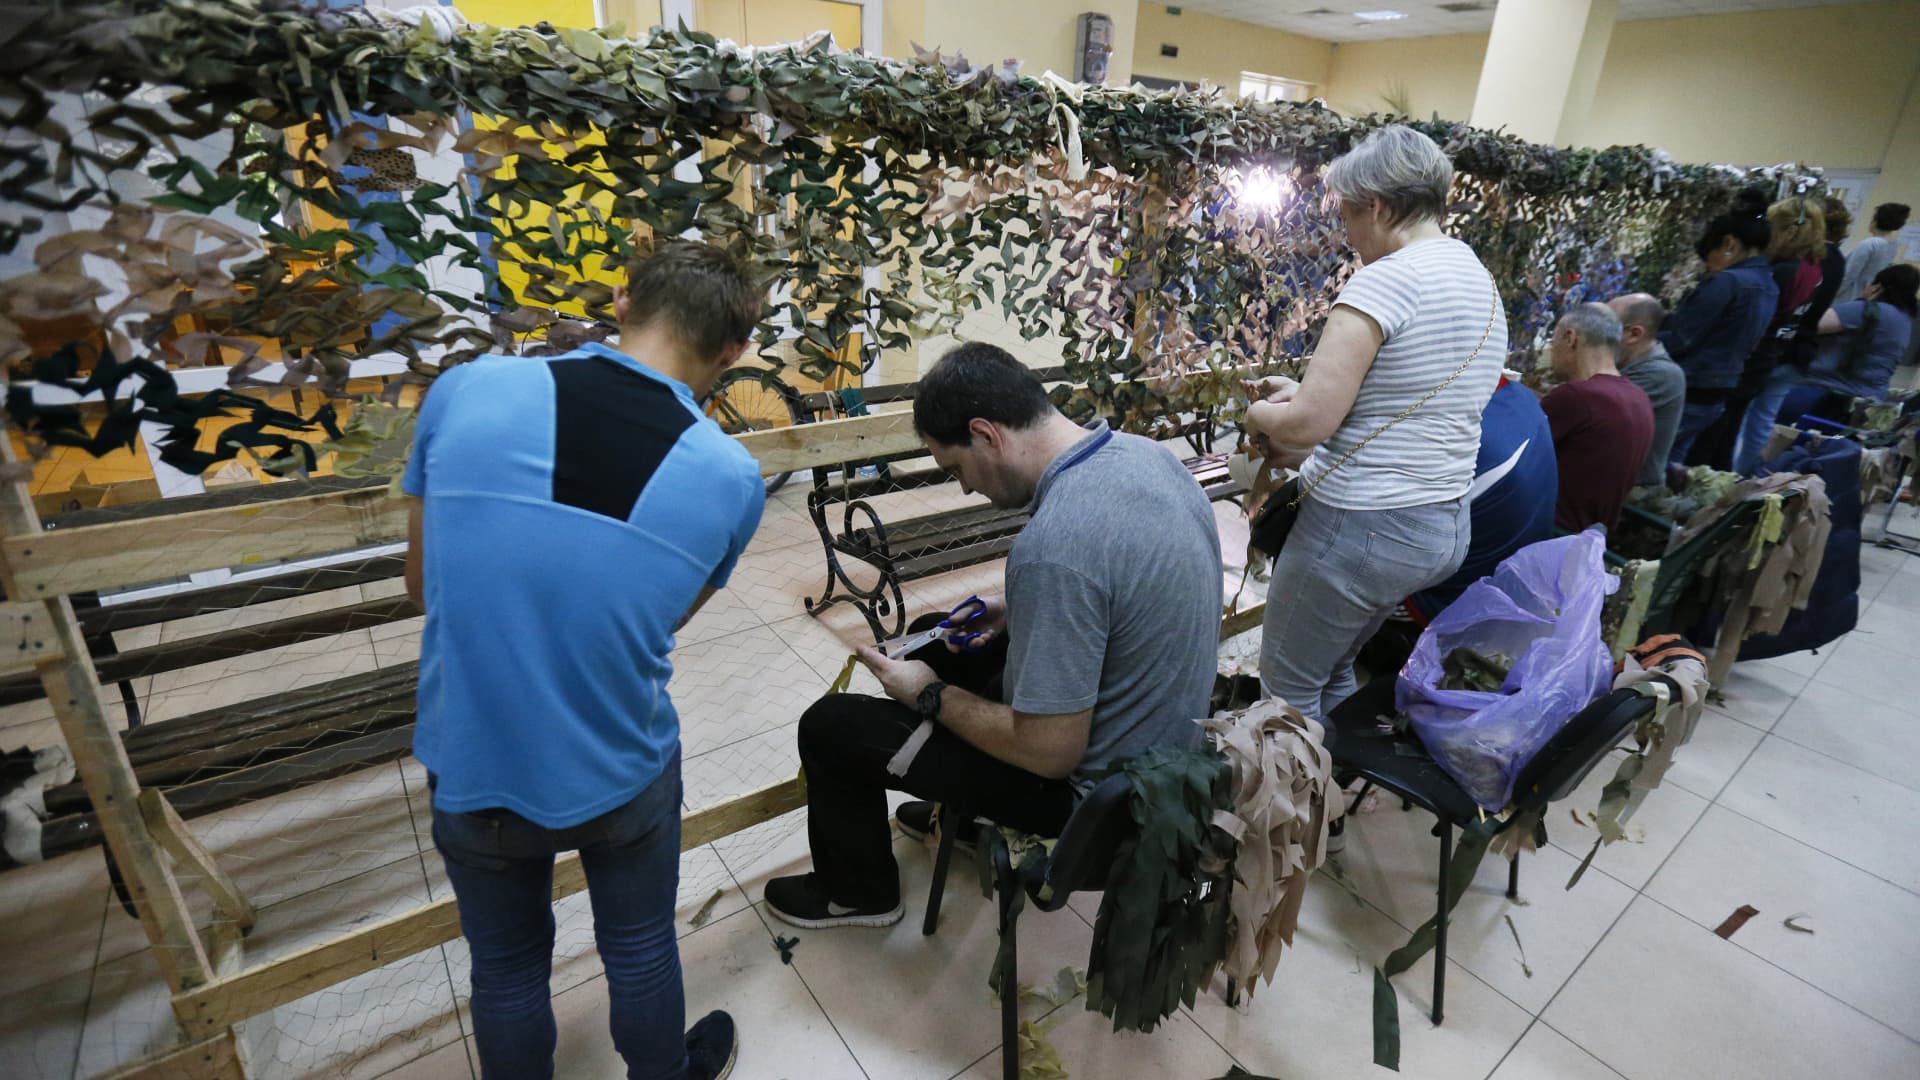 People weave camouflage nets in a weaving camouflage nets center in Odessa, Ukraine, on May 30, 2022. Ukrainian volunteers mark the 500th net which they made for the Ukrainian army.